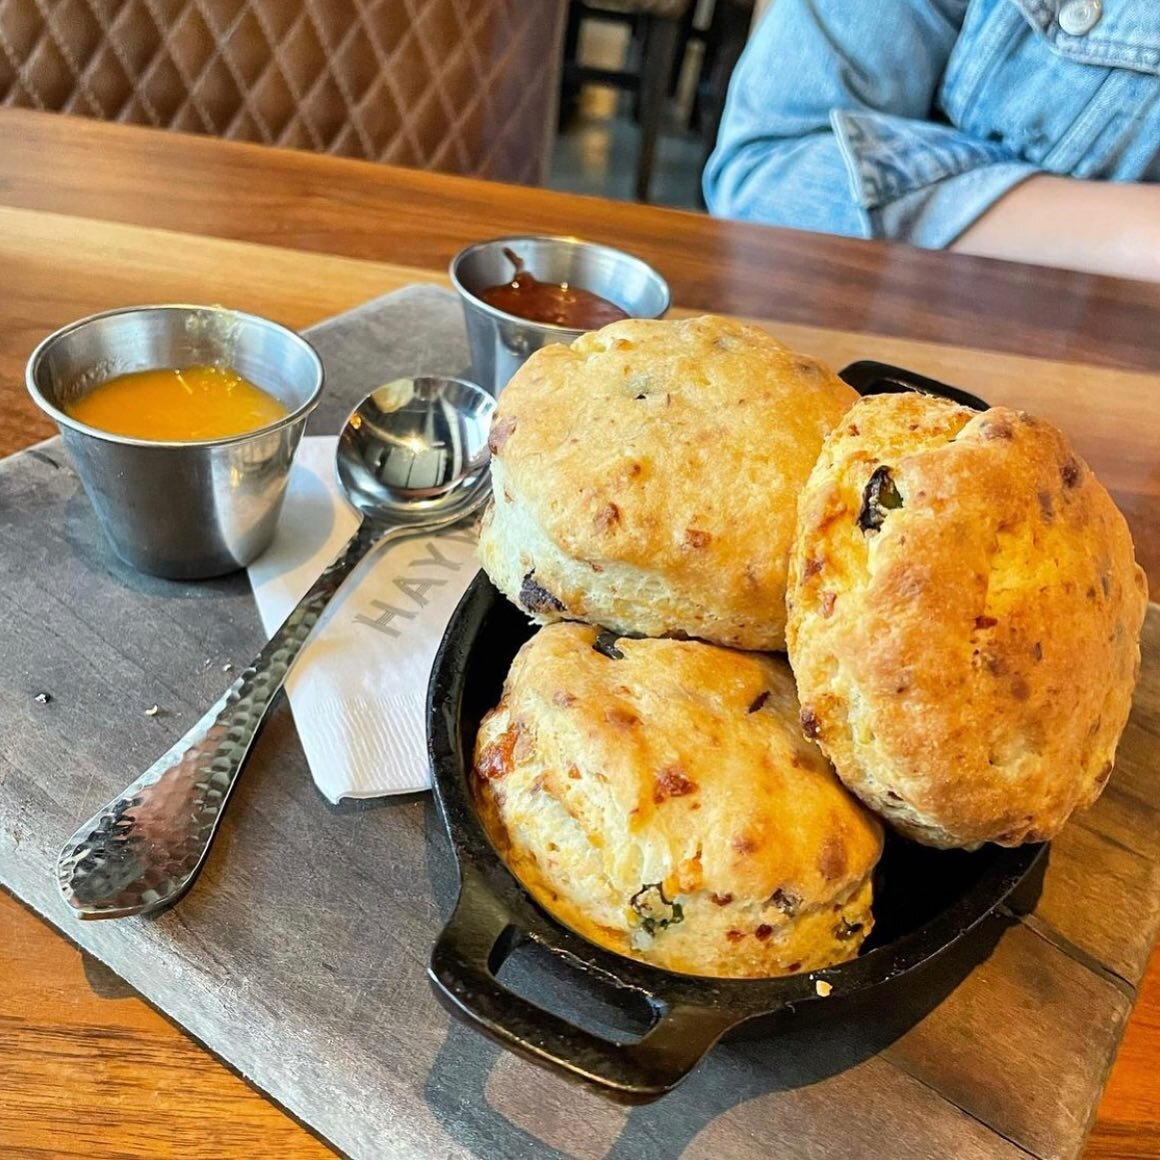 Go ahead and order a Brunch appetizer! These cast iron cheddar, bacon, and jalape&ntilde;o biscuits are amazing 🤤 @haywireplano #legacywest @sheeatsdallas